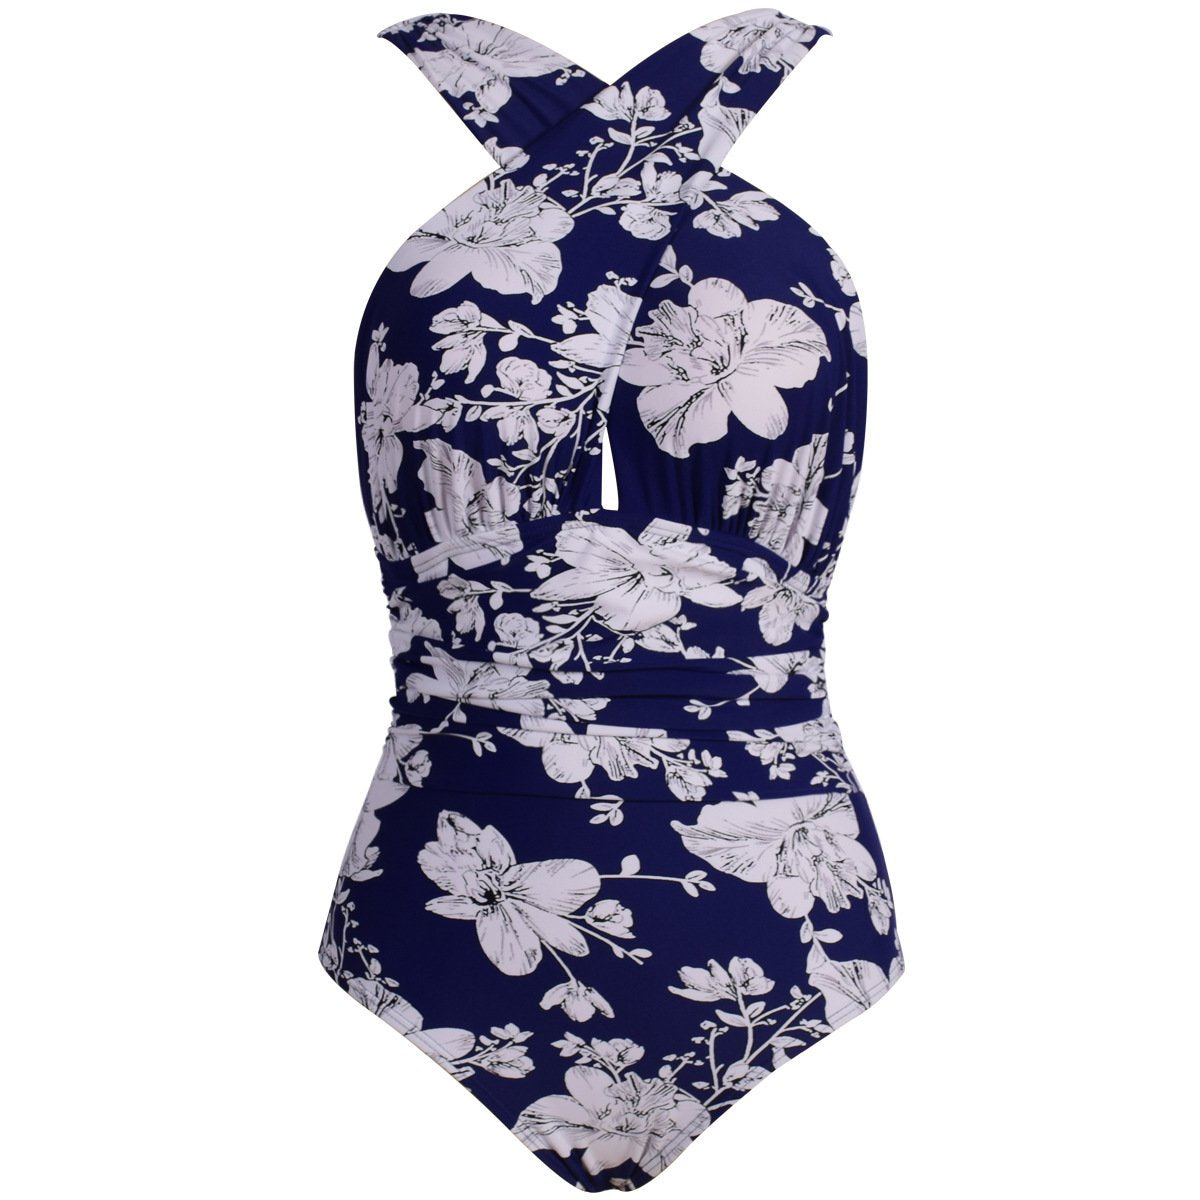 Plus Size Women One Piece Halter Swimsuit-White Flower-S-Free Shipping at meselling99